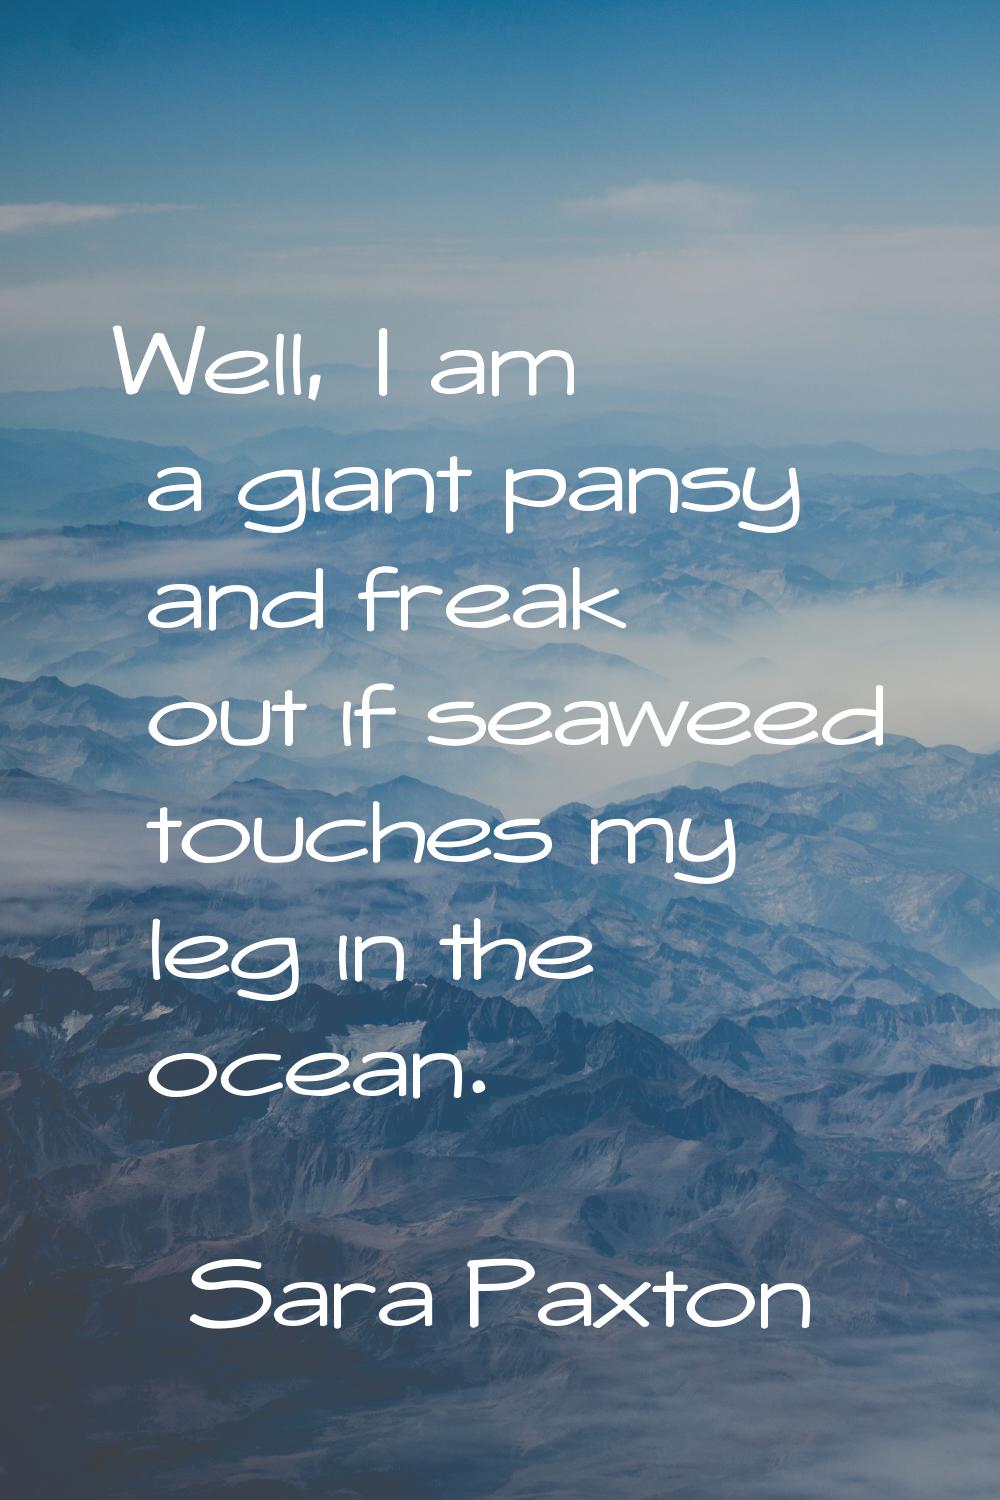 Well, I am a giant pansy and freak out if seaweed touches my leg in the ocean.